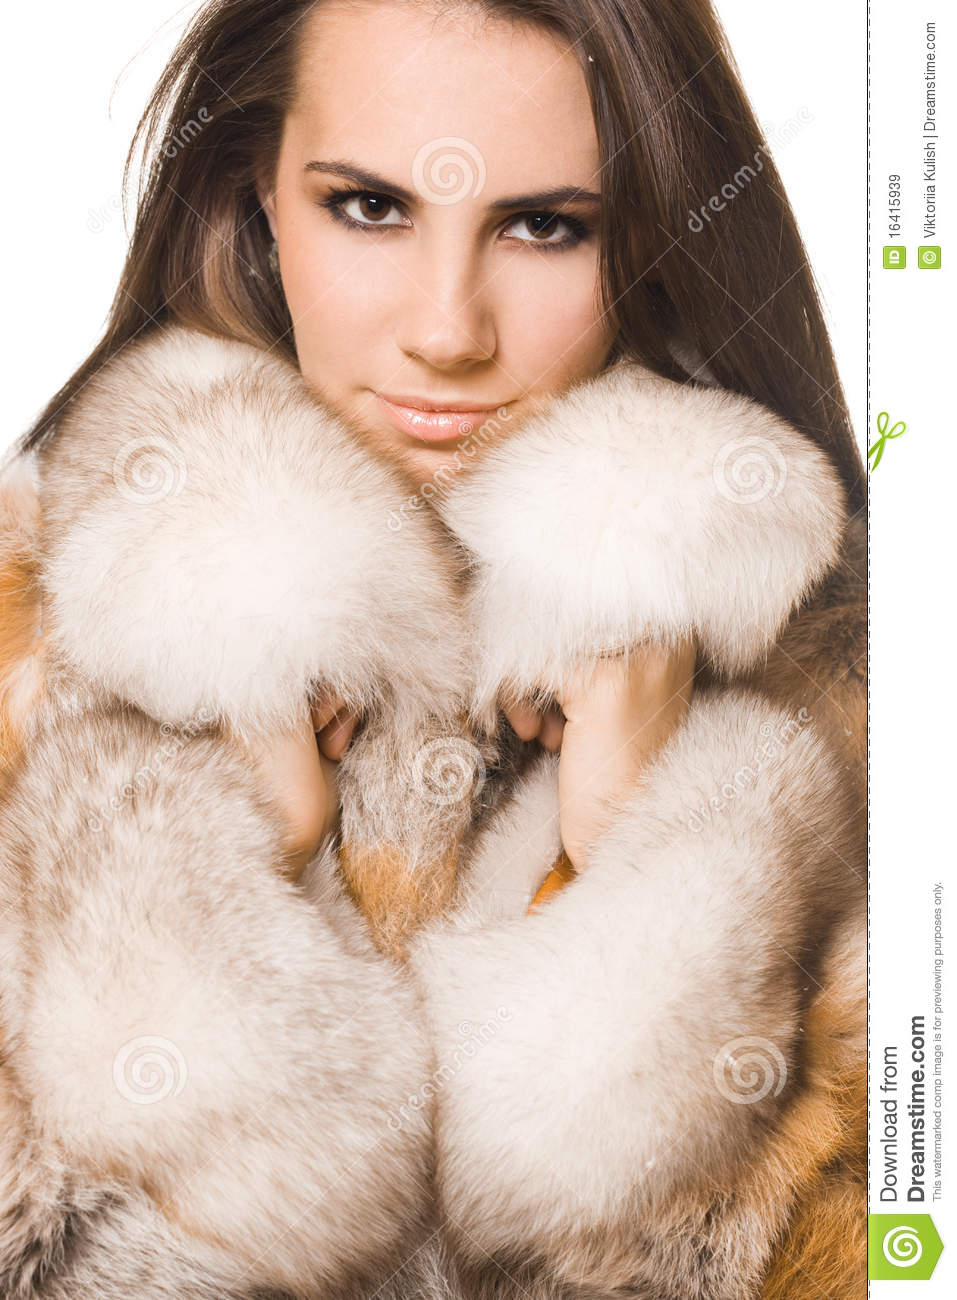 Woman In A Fur Coat Royalty Free Stock Images   Image  16415939